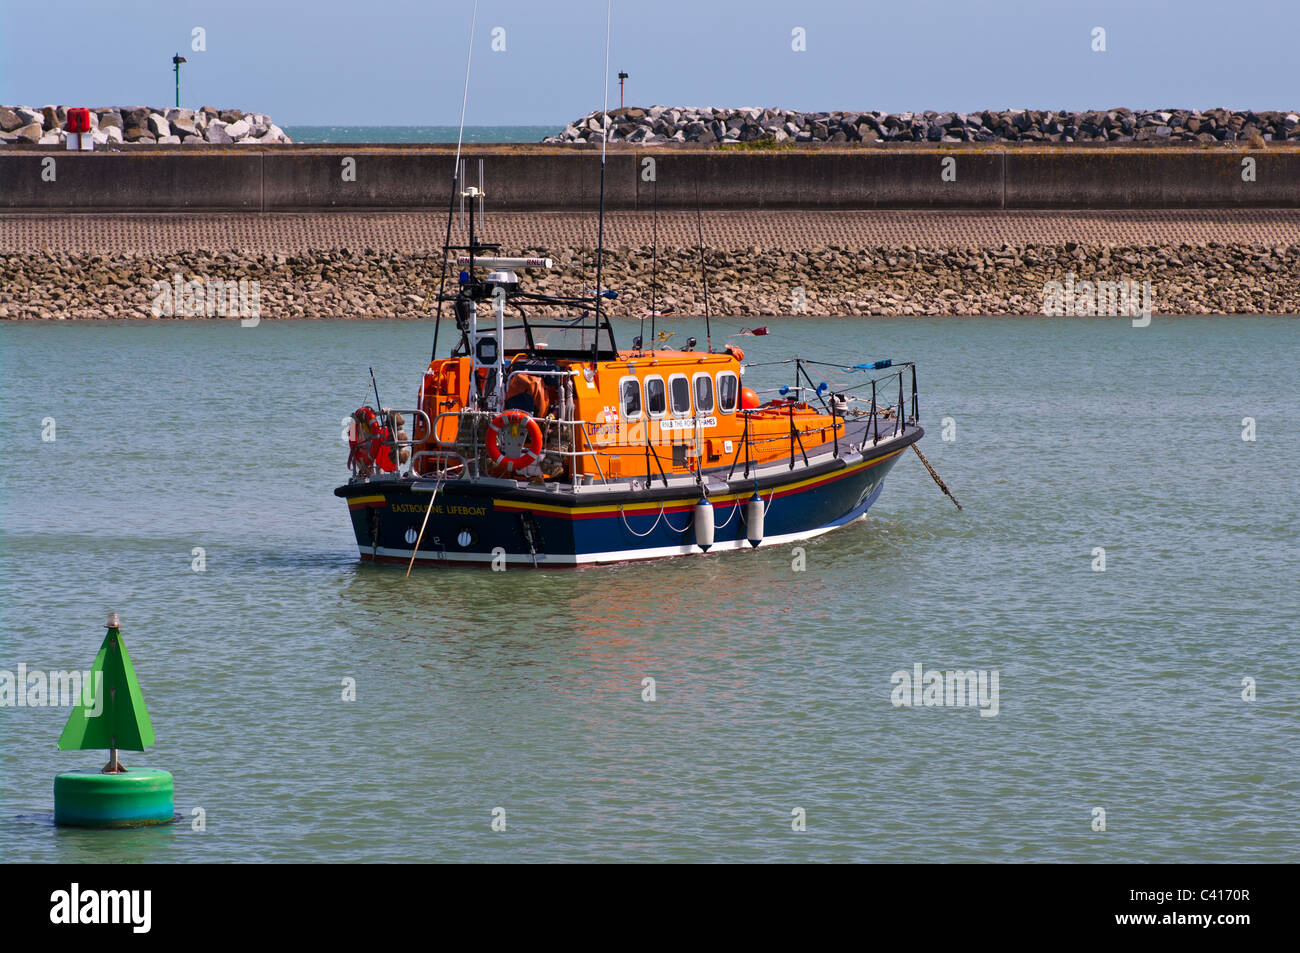 - 6X4 12-30 Photo RNLI Mersey Lifeboat ON 1189 HER MAJESTY THE QUEEN 10X15 